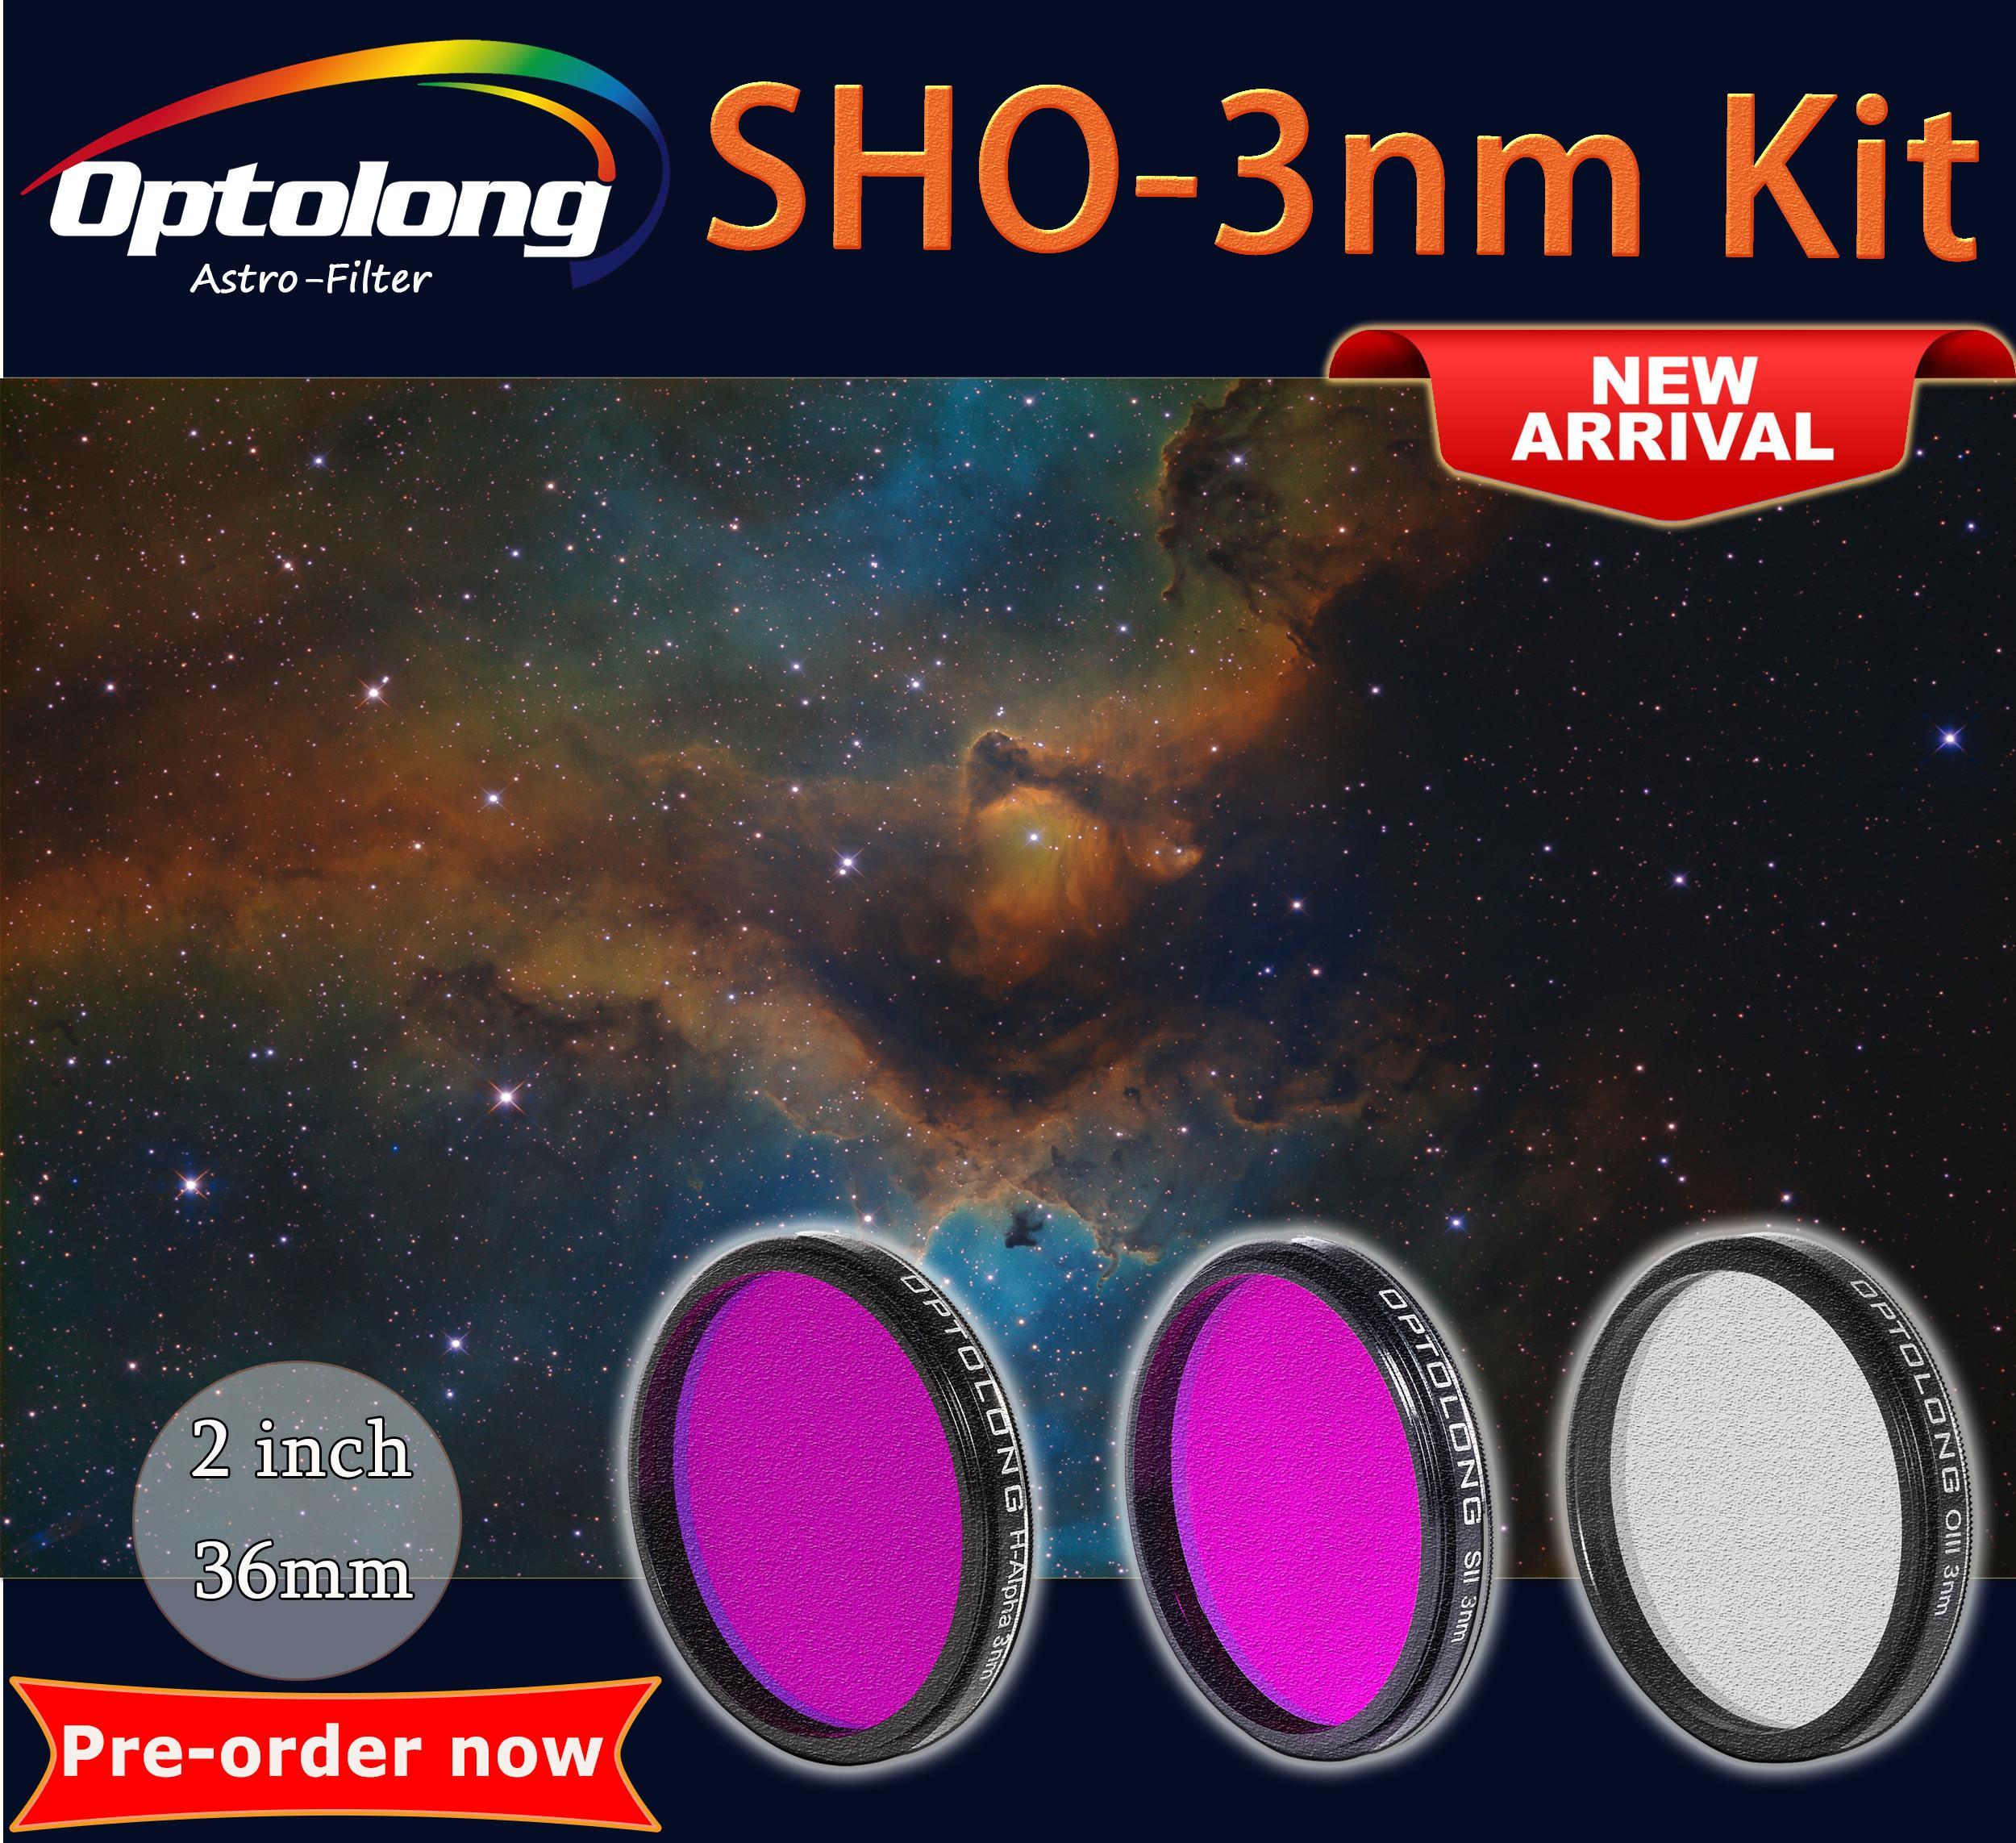 2021 NEW ITEMS SHO-3nm Narrowband Filters are available